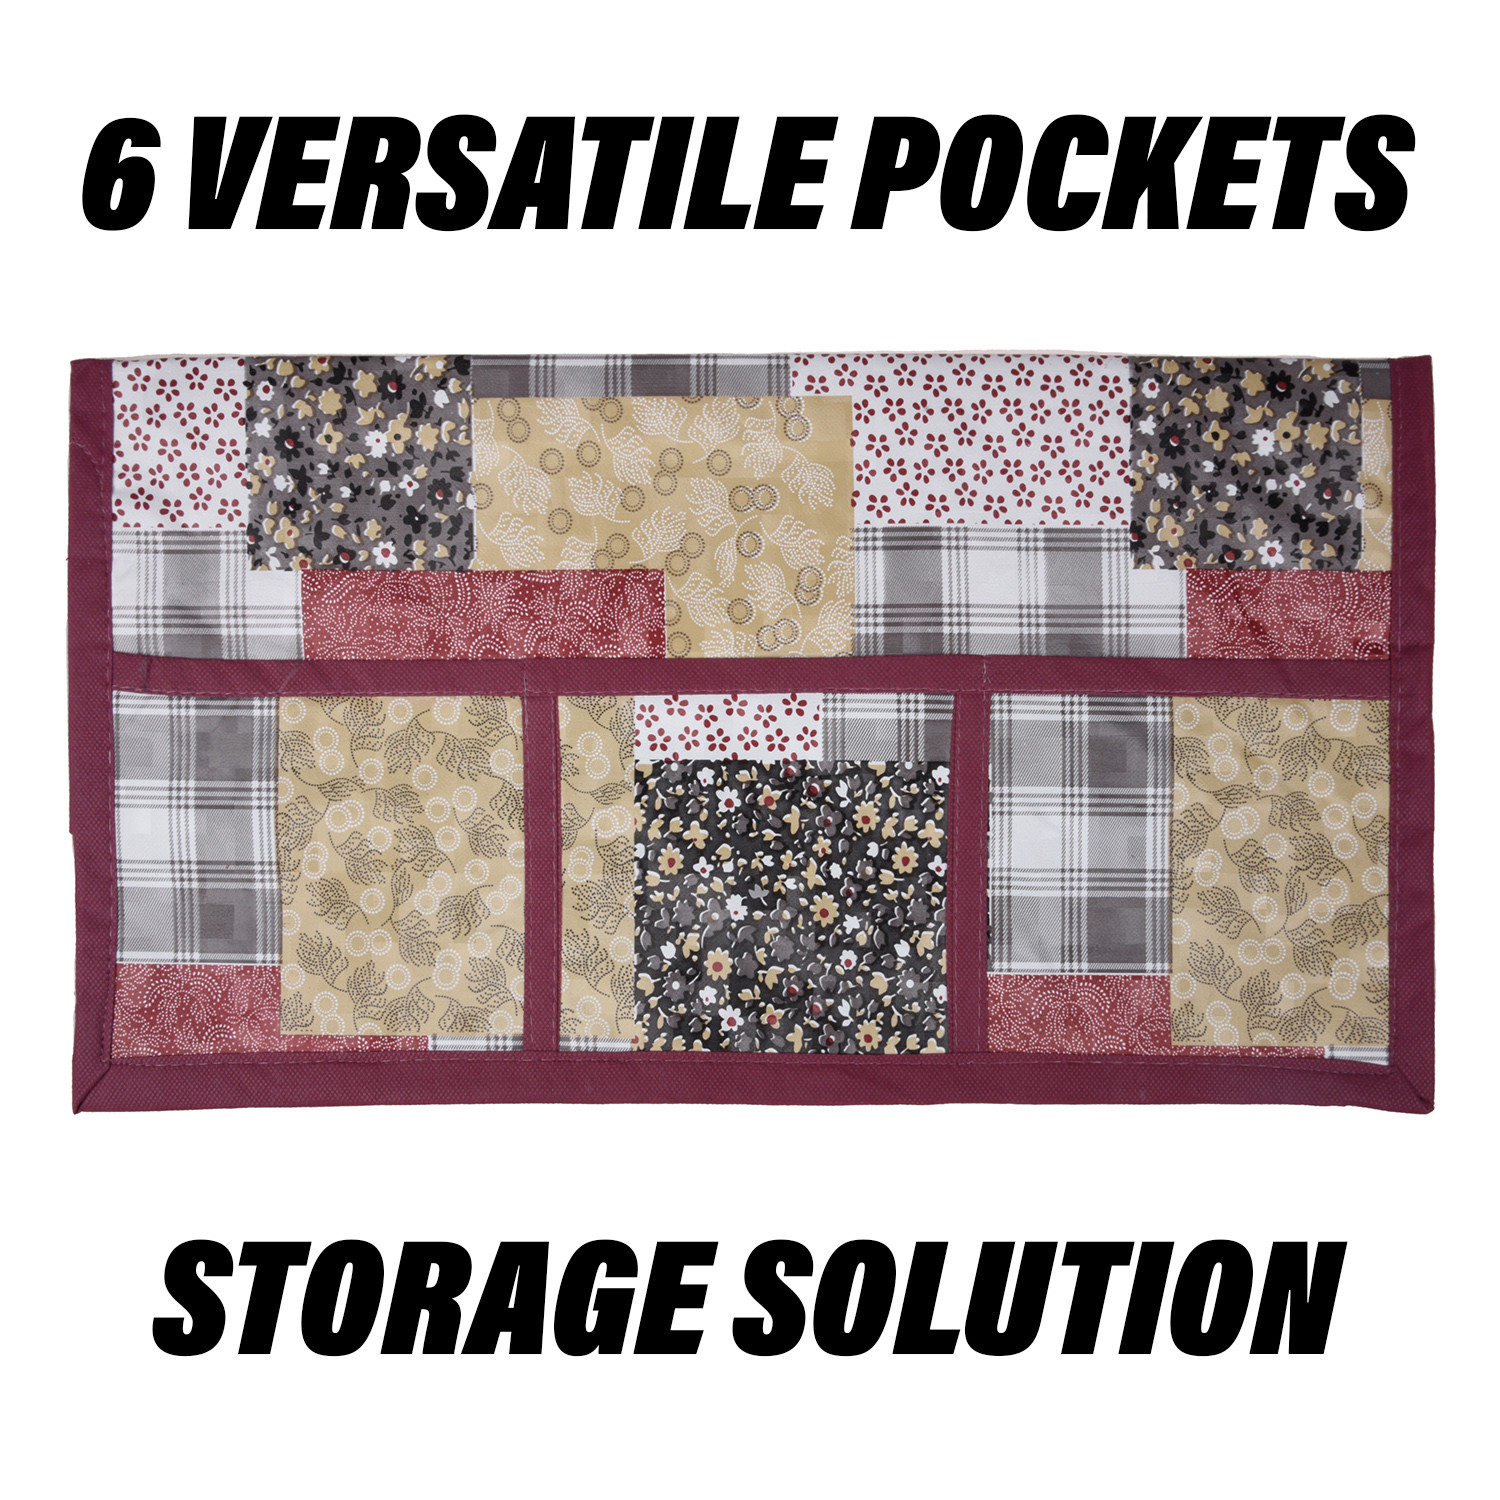 Kuber Industries Fridge Top Cover | Fridge Top Cover with Pockets | Refrigerator Top Cover for Kitchen | Fridge Top Cover with 6 Utility Pockets | Barik Flower Fridge Cover | Maroon